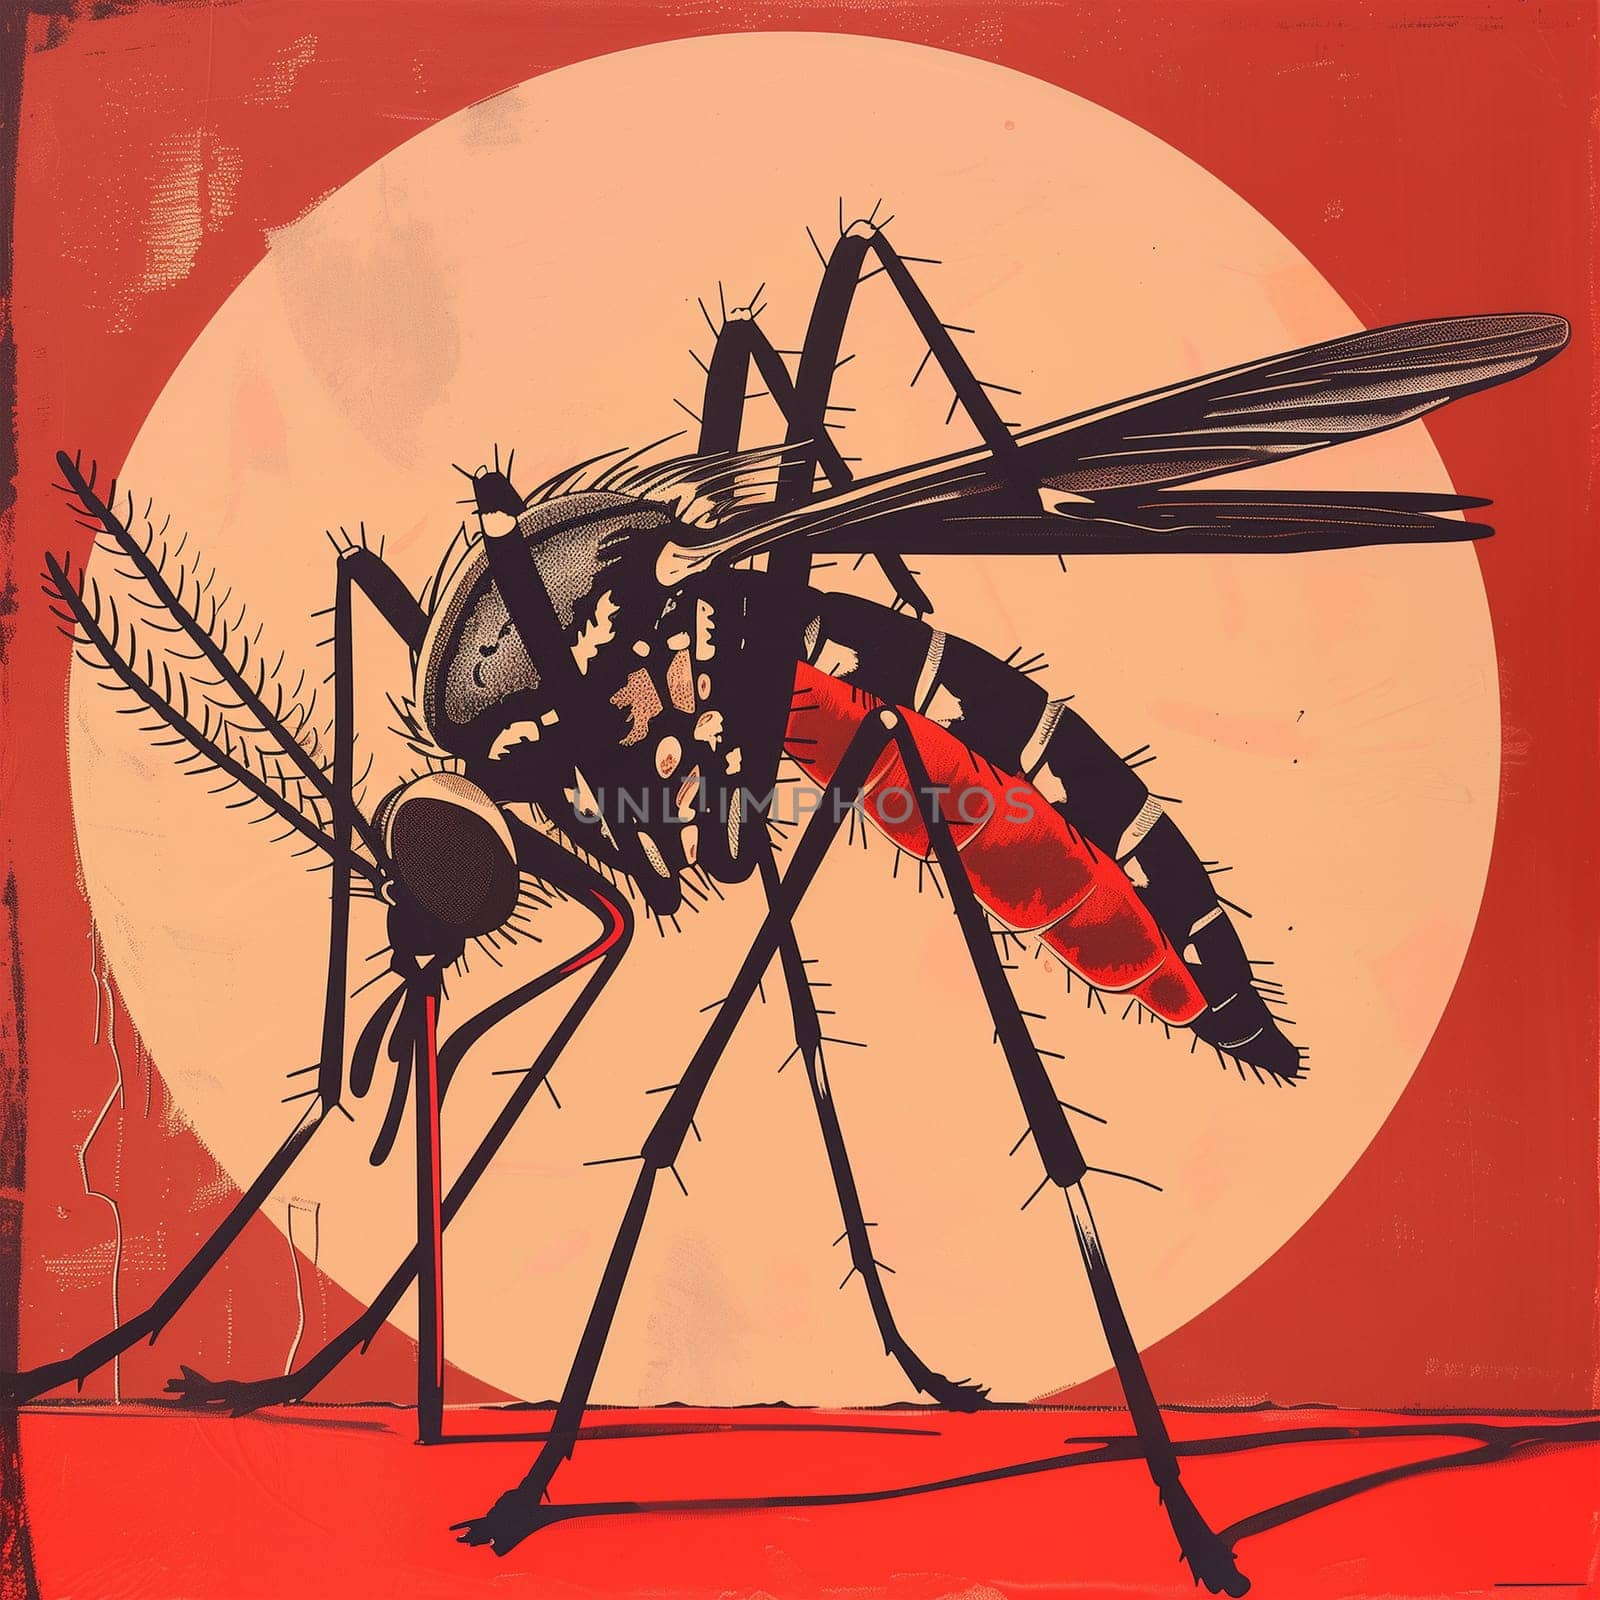 A detailed view of a mosquito on a vibrant red background, showcasing the insects anatomy and coloring.